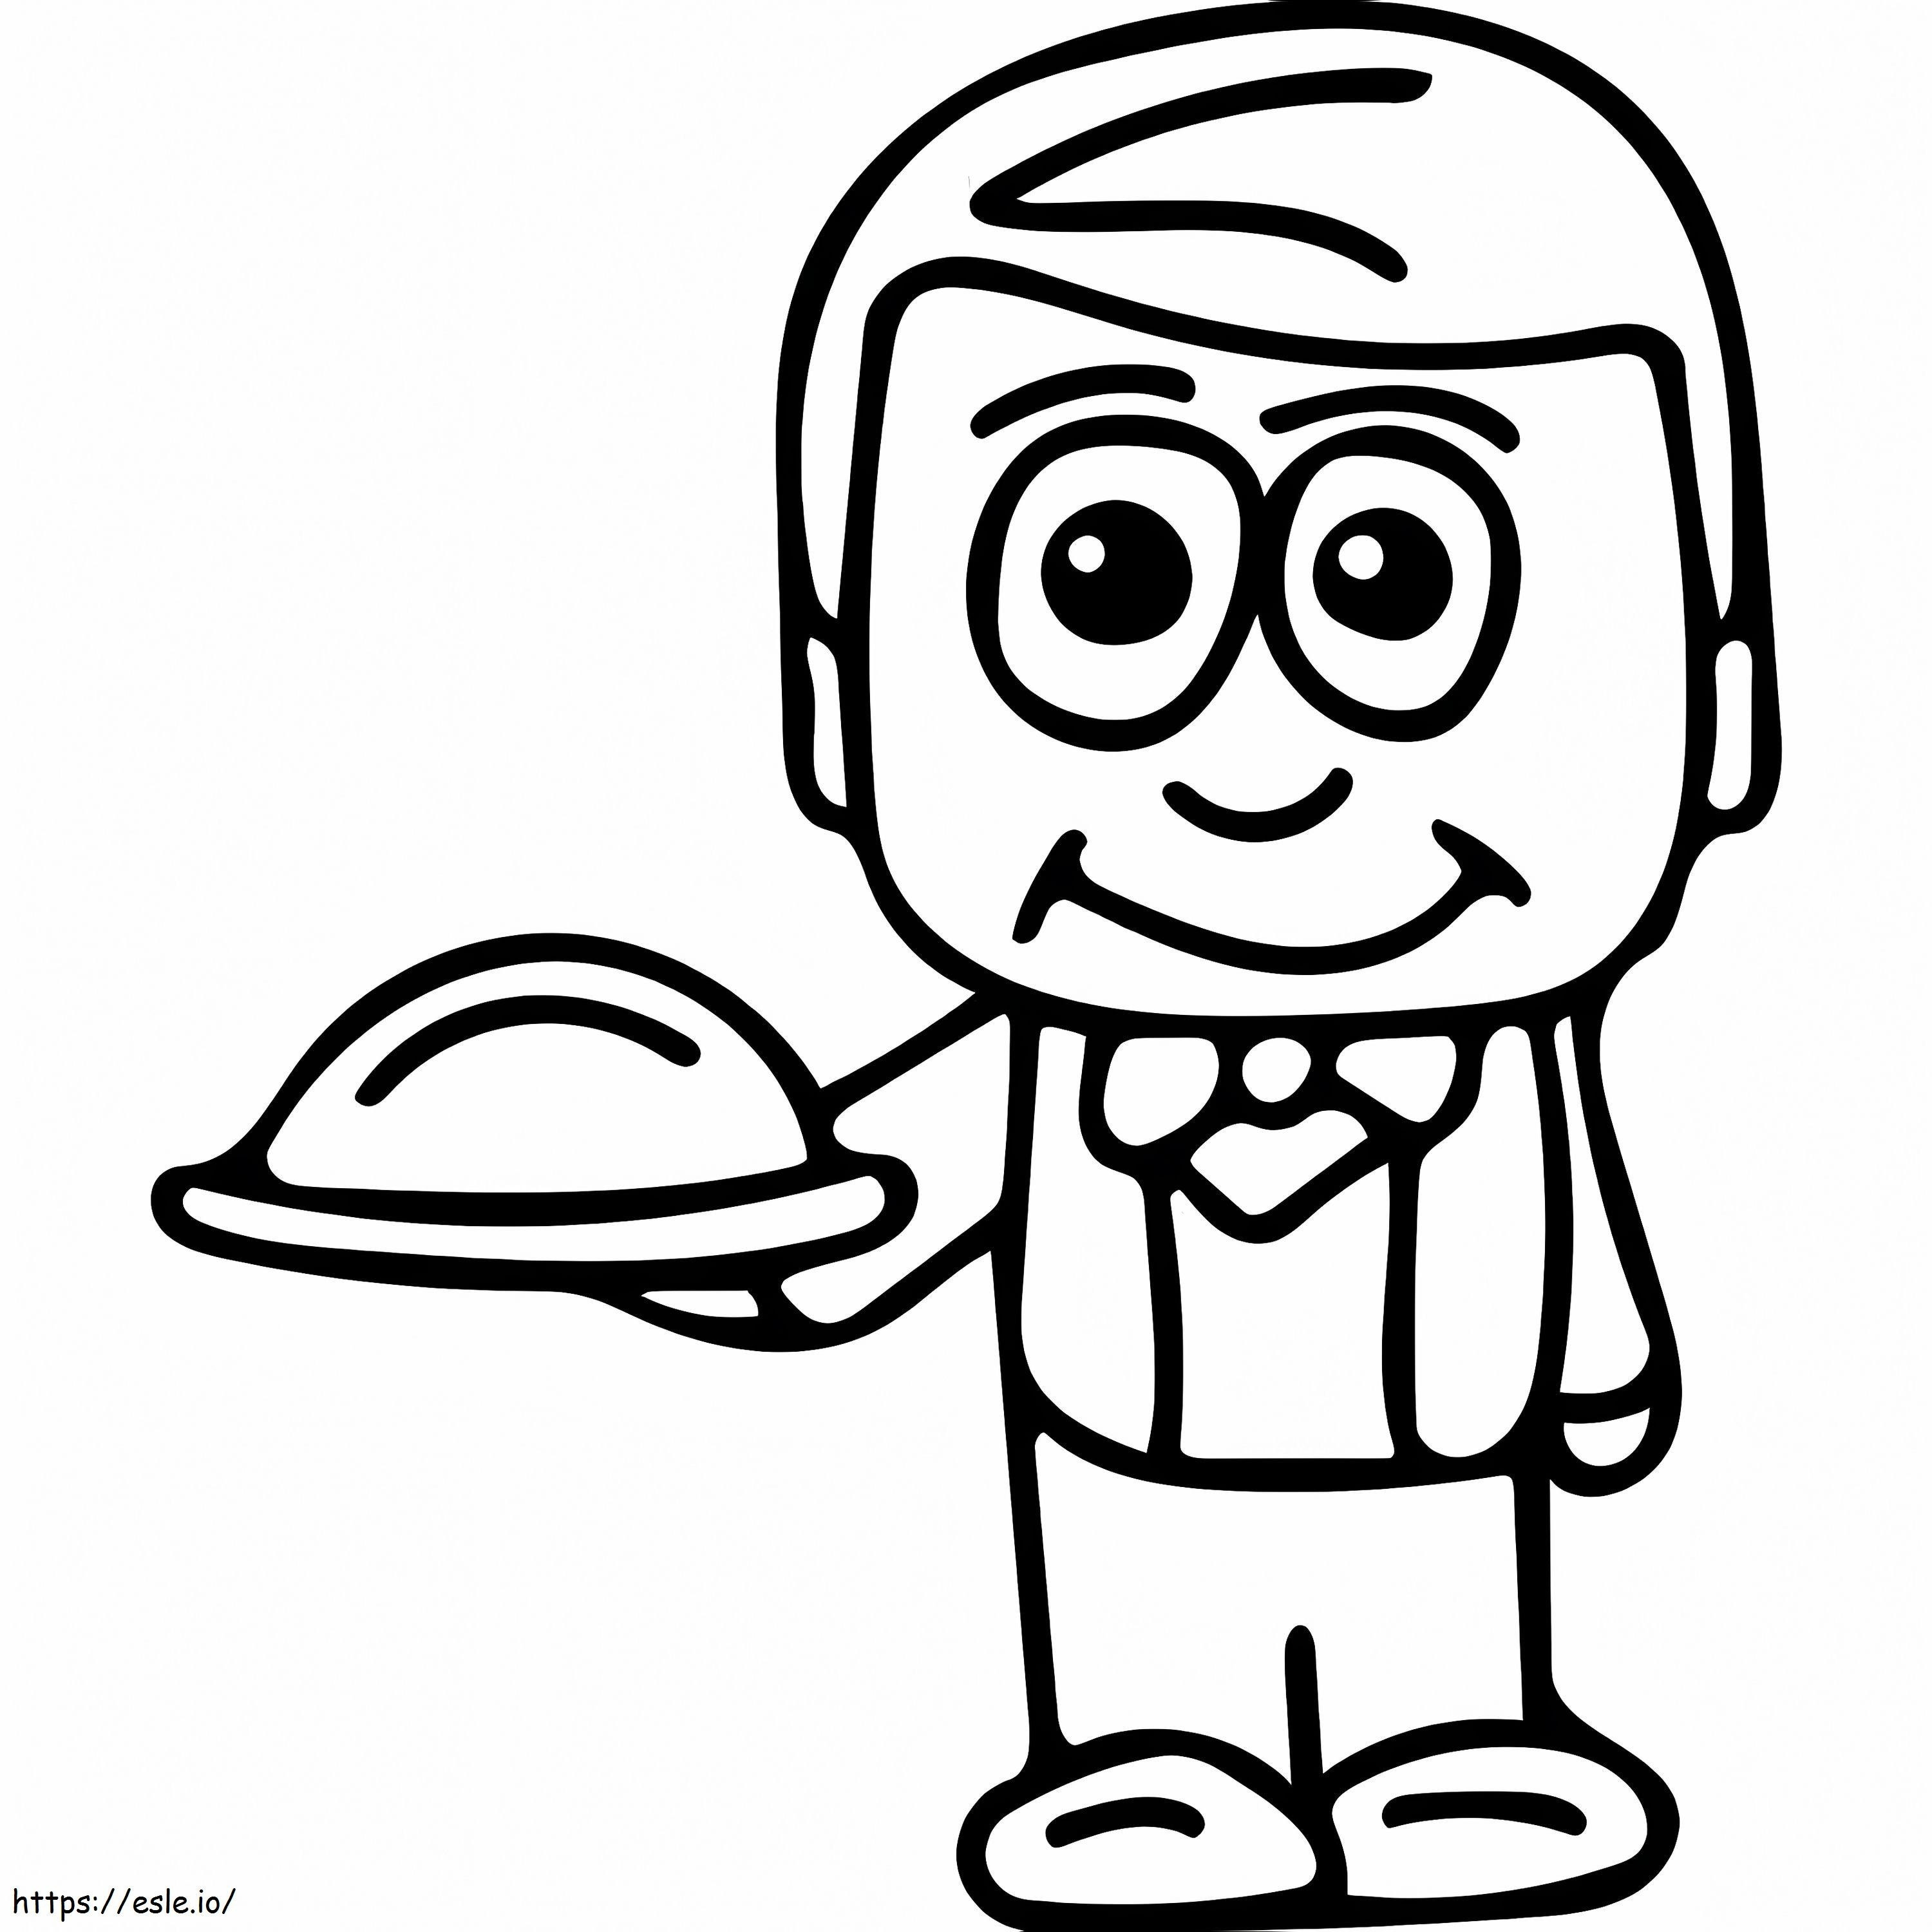 Waiter 4 coloring page